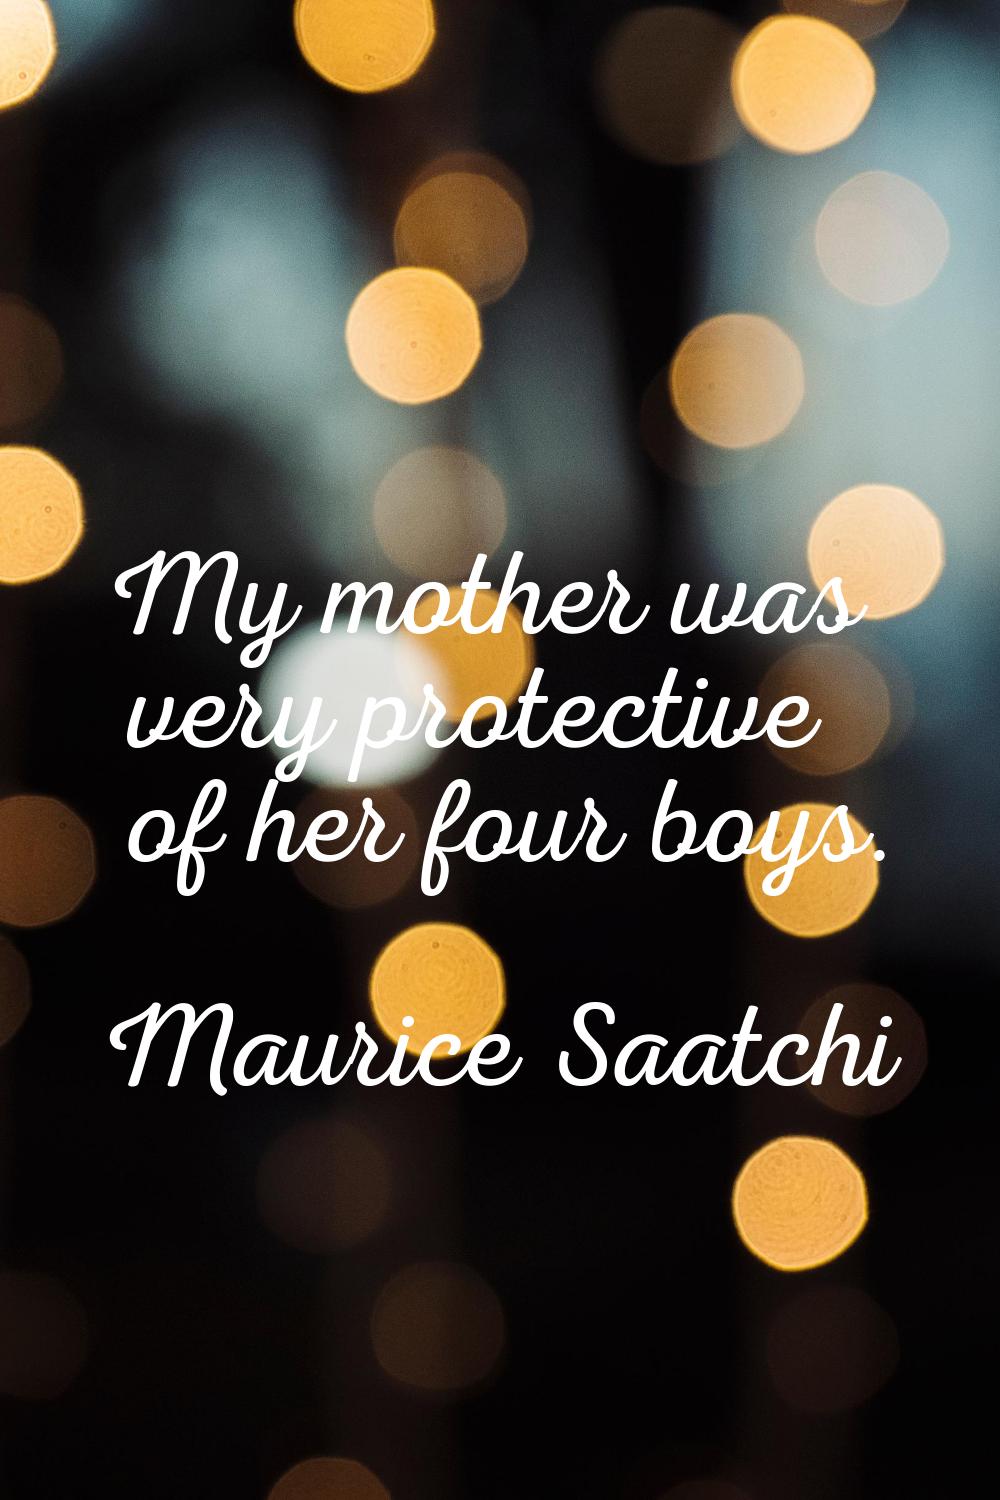 My mother was very protective of her four boys.